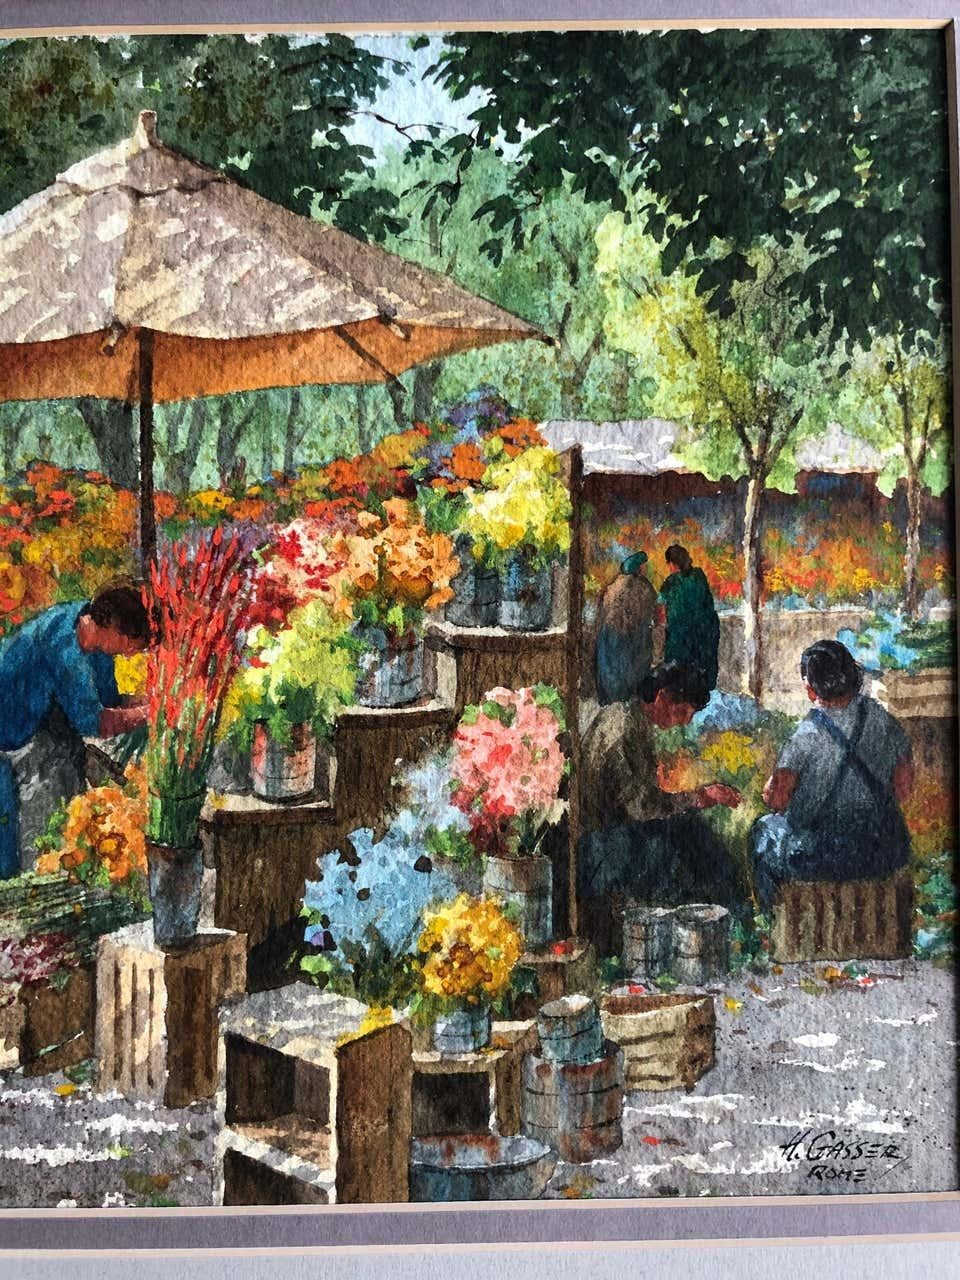 The Flower Workers, Rome - Impressionist Art by Henry Martin Gasser